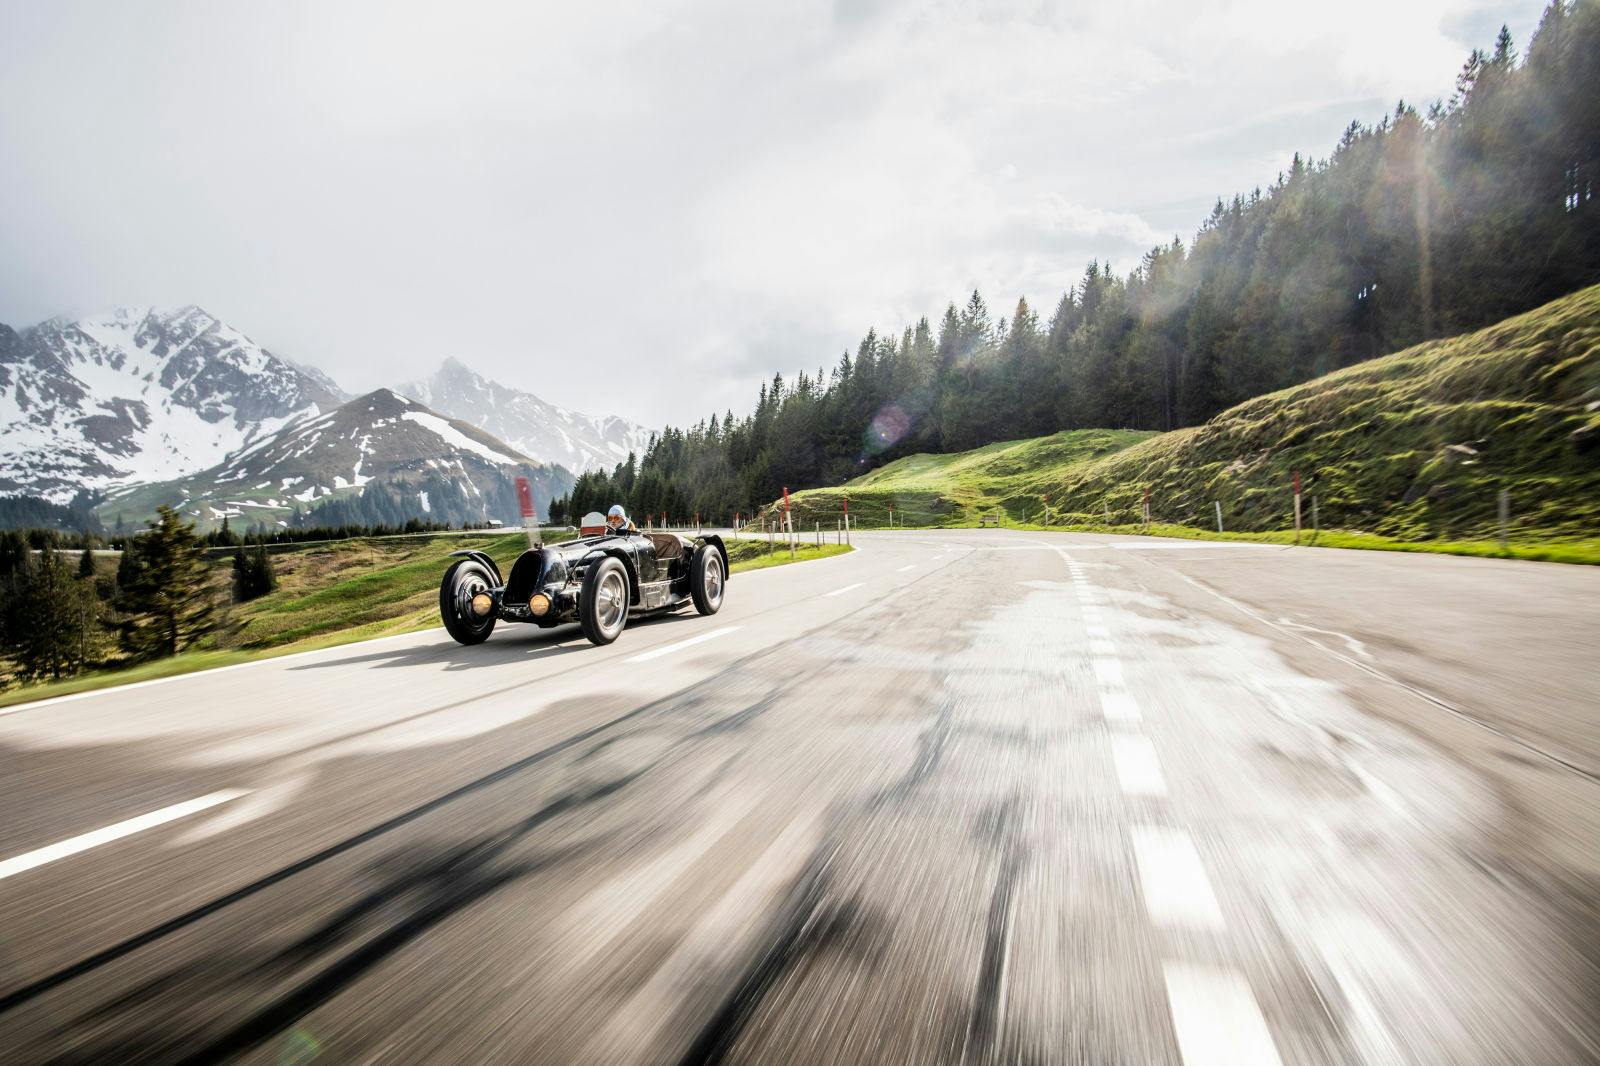 Bugatti Type 59 Sports: an exceptional sports car with a victorious racing history